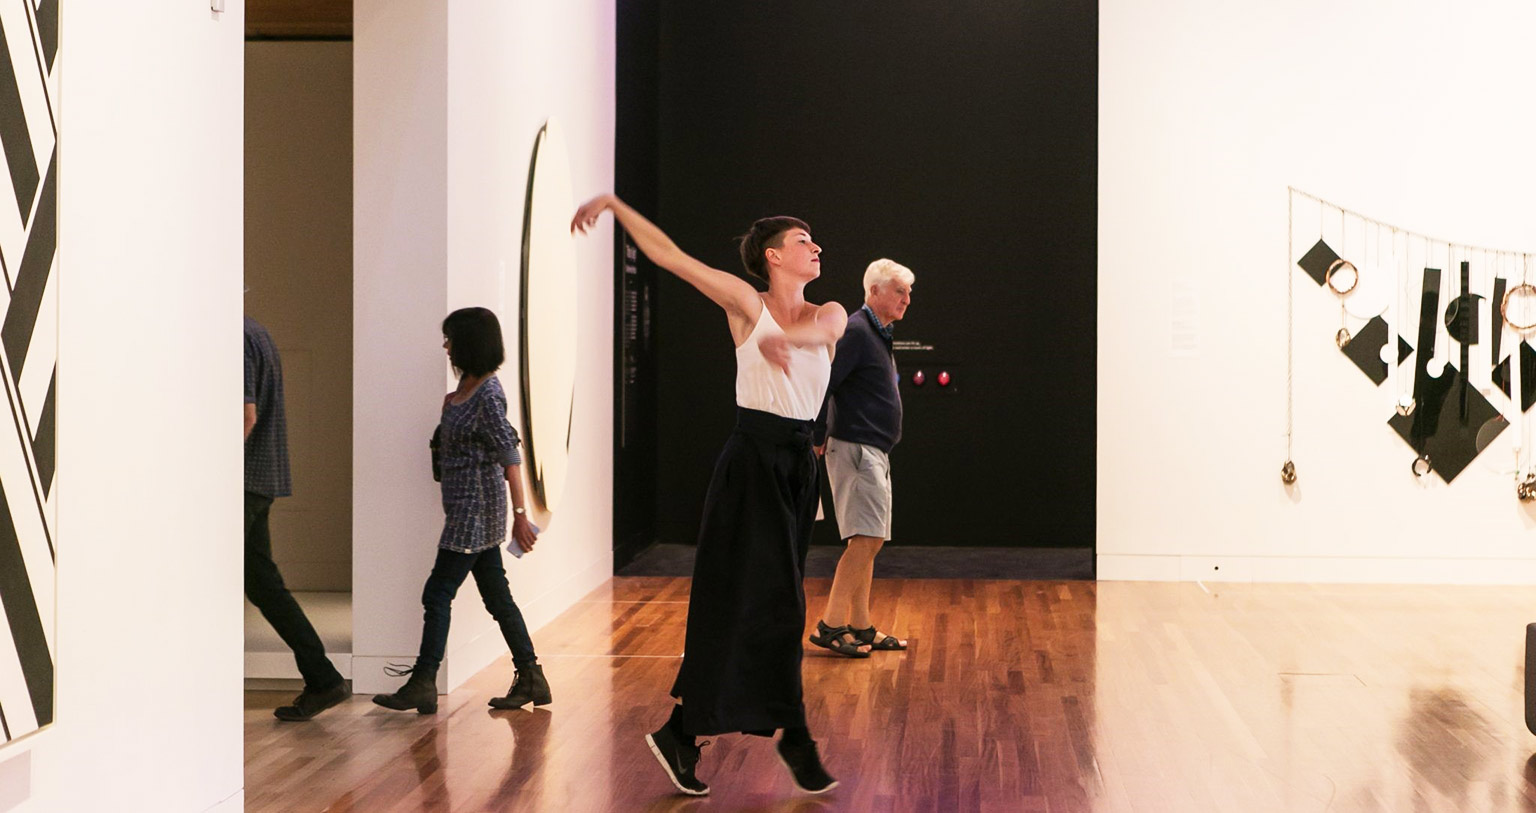 Follow: Immersive Movement Tours with BodyCartography Project